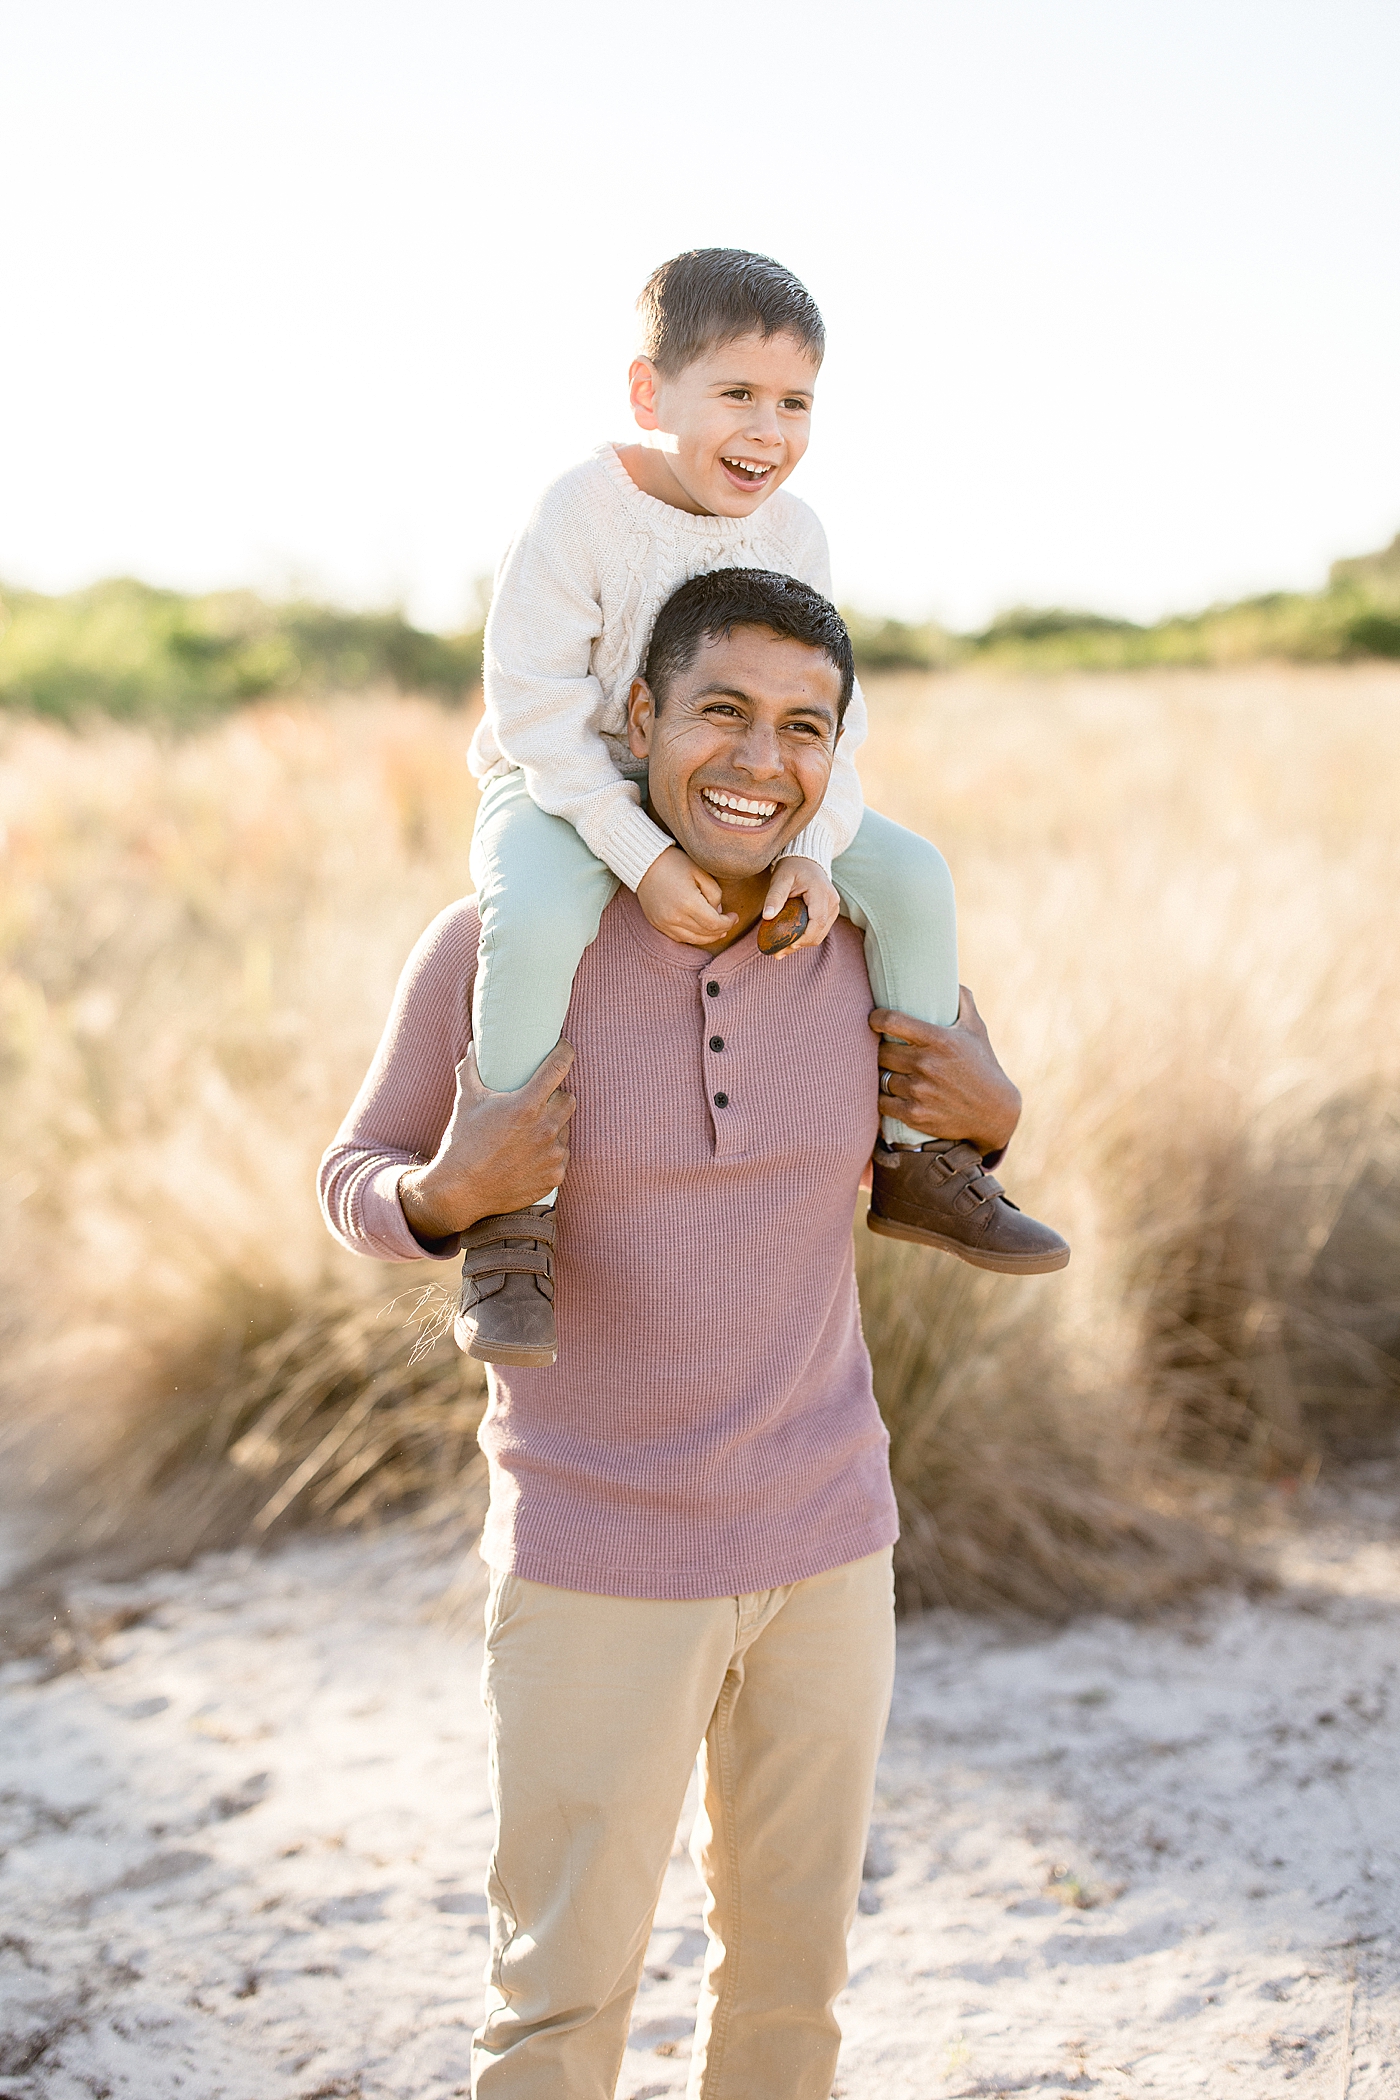 Son riding piggy back on Dad's shoulders. Photos by Brittany Elise Photography.